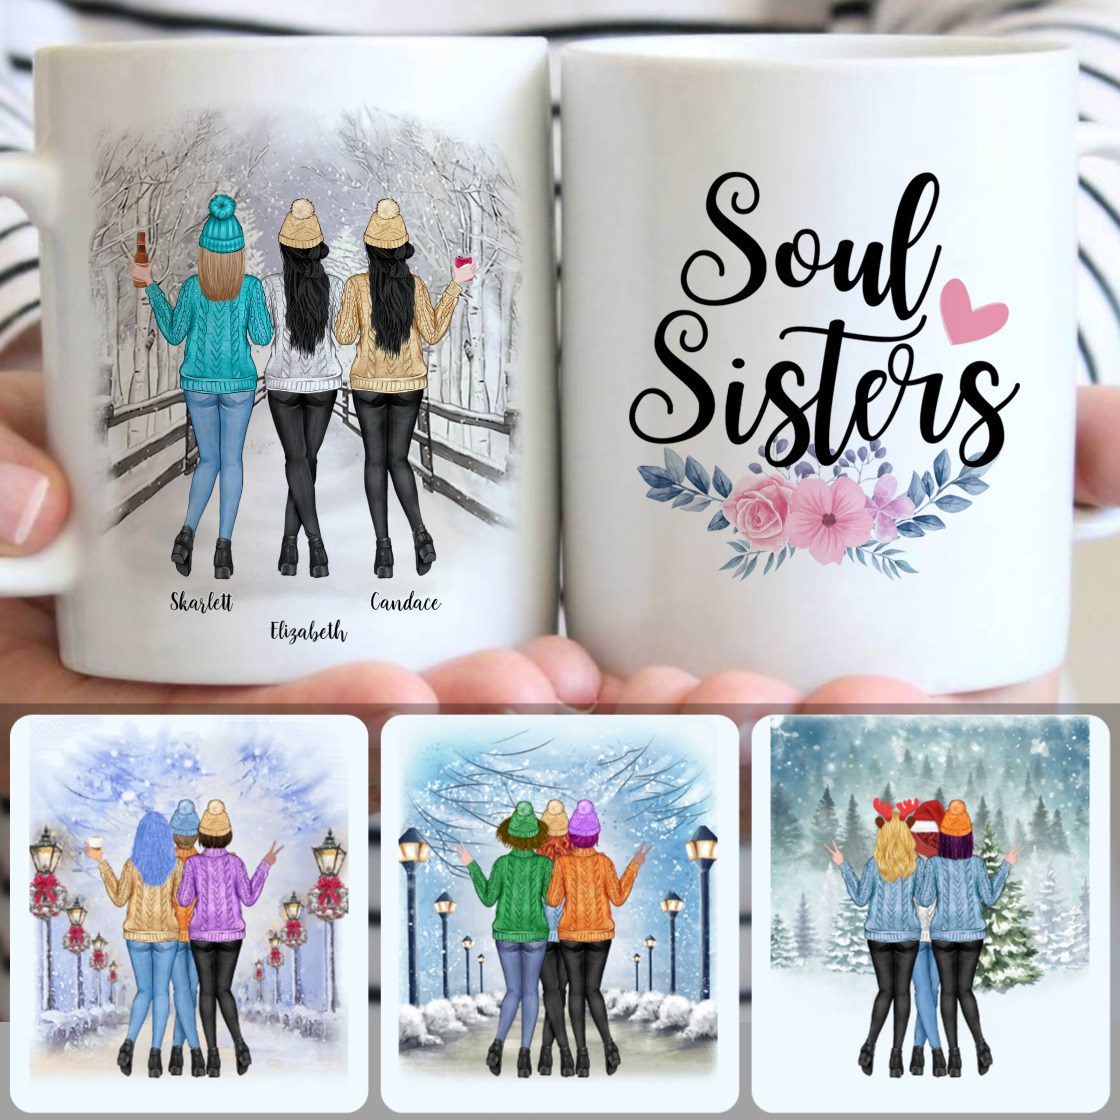 Personalized Mug, Special Christmas Gifts, 3 Soul Sisters Customized Coffee Mug With Names